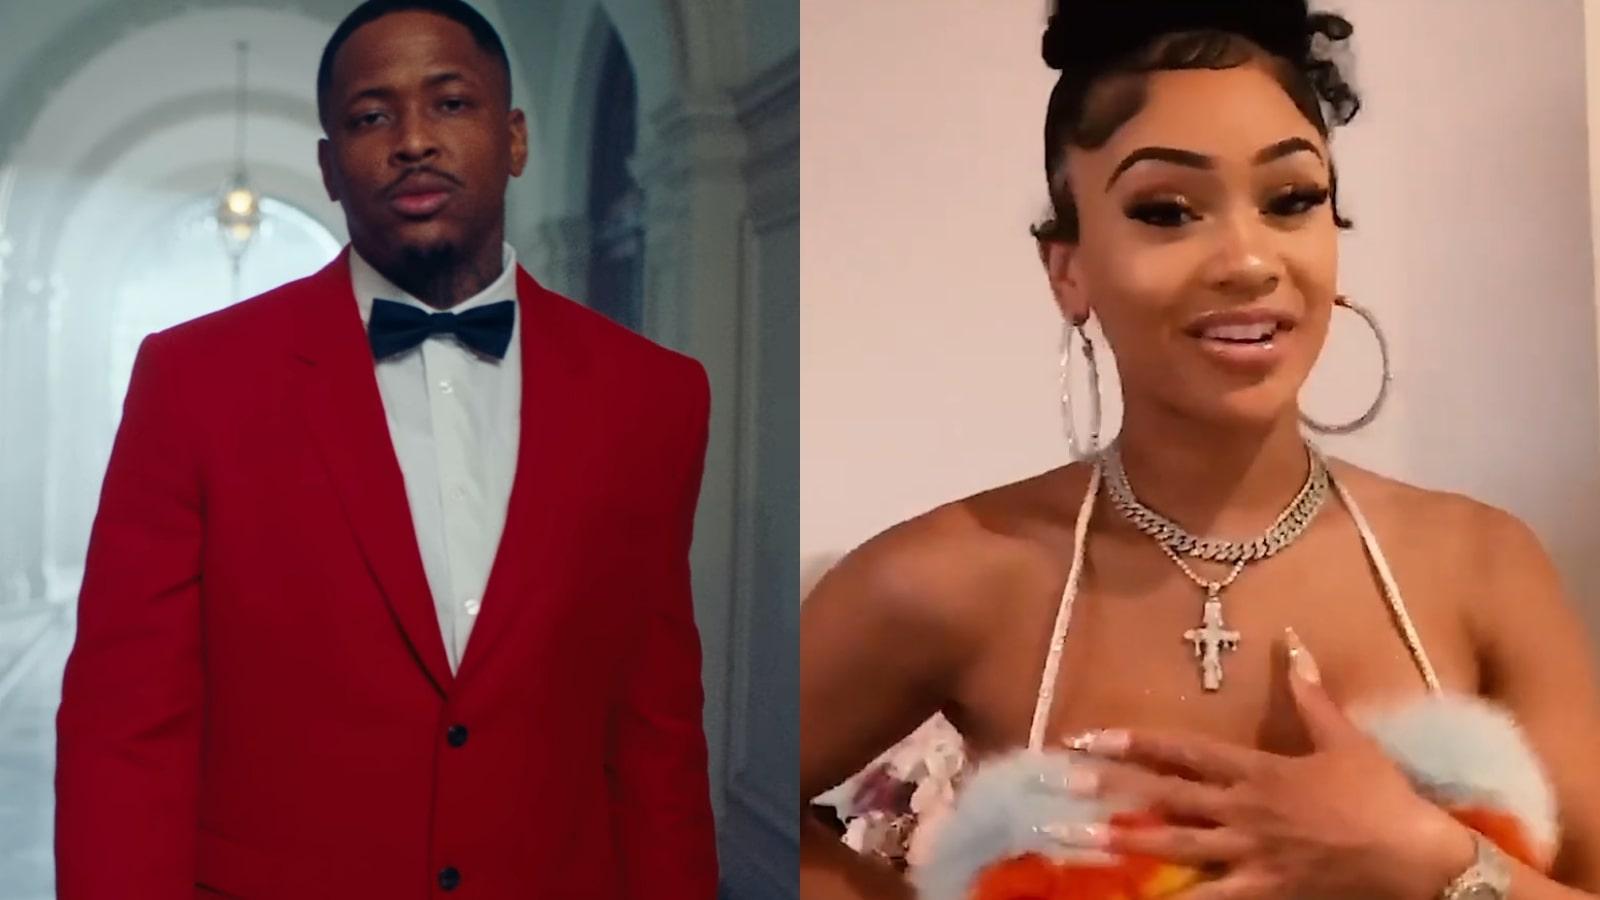 YG and Saweetie in a side-by-side photo